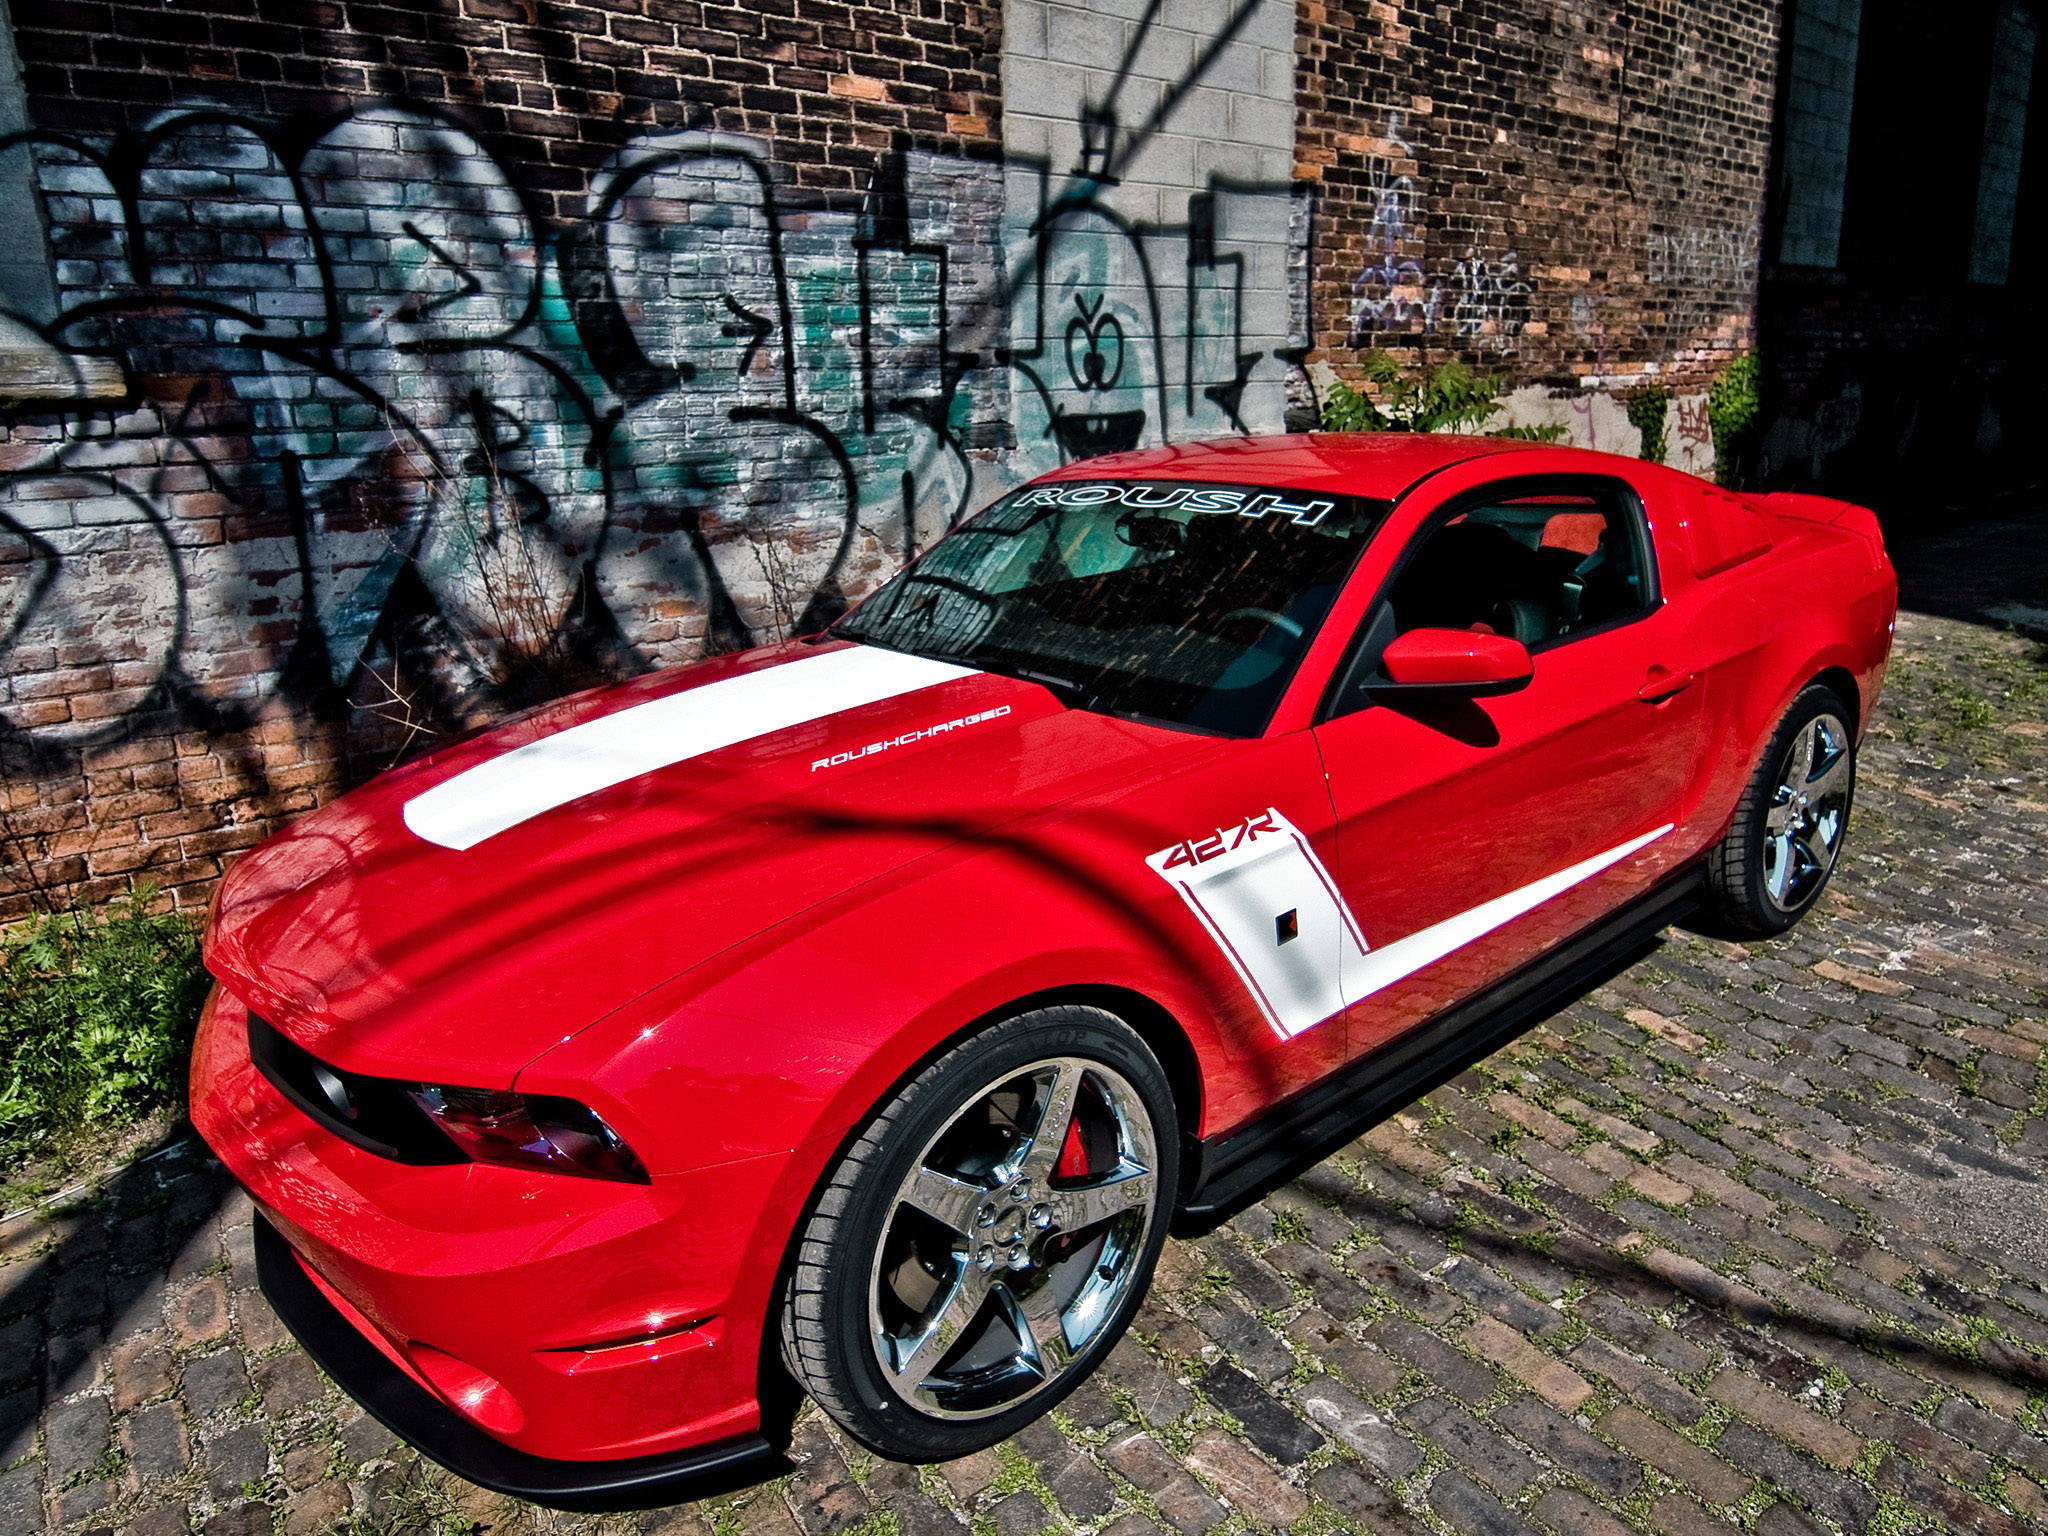 2010, Roush, Ford, Mustang, 427r, Muscle Wallpaper